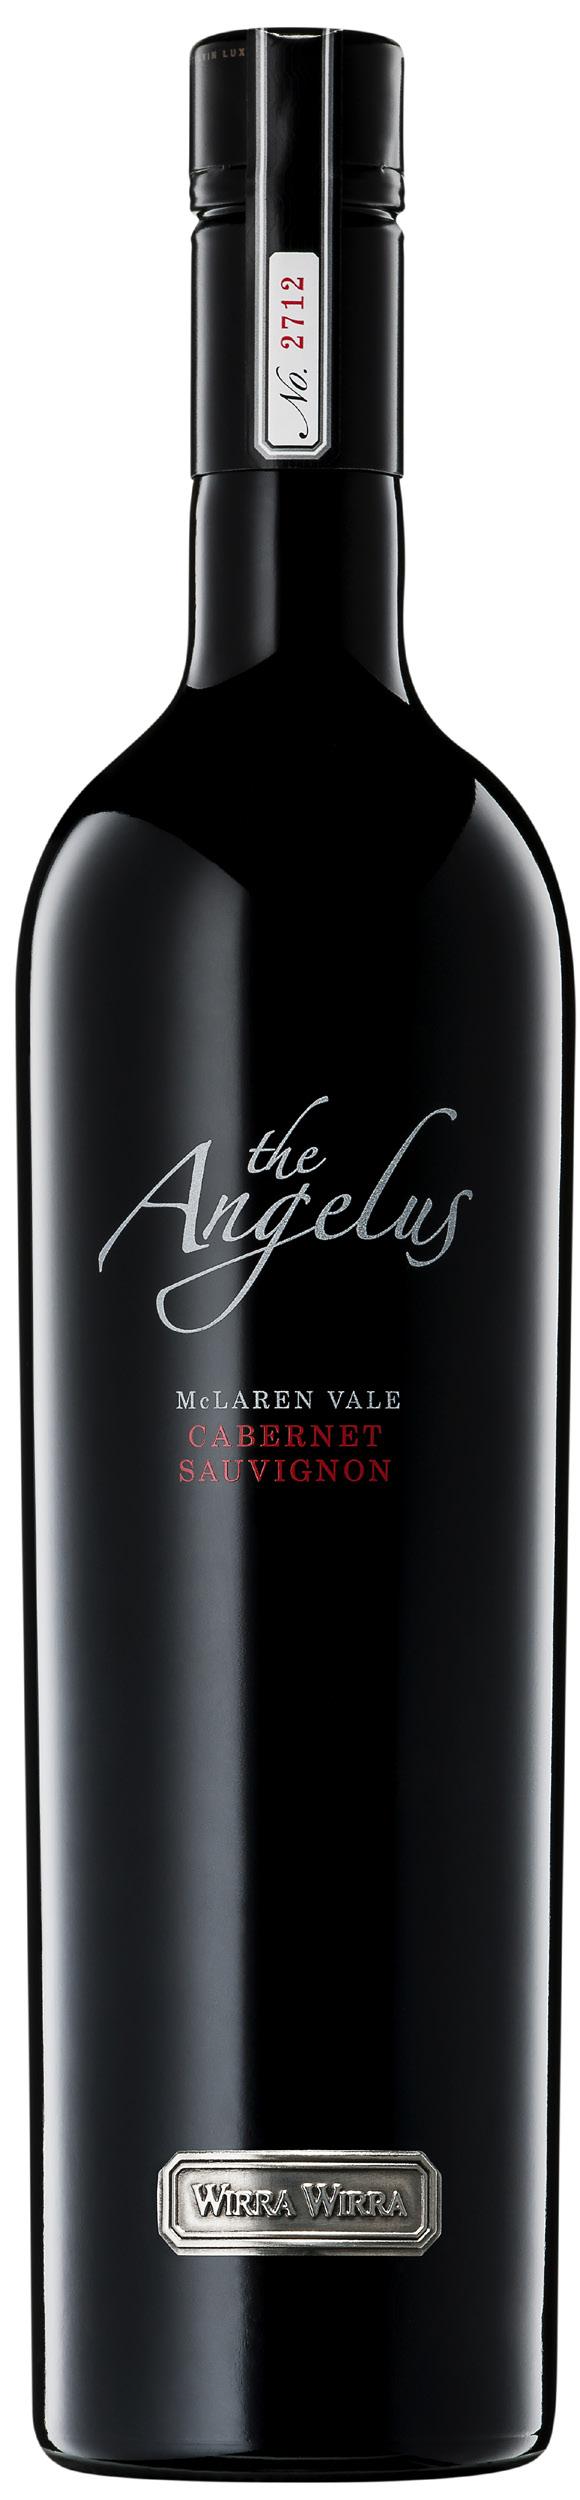 2010 The Angelus James Halliday Australian Wine Companion 2013 - JUL 2012 Deep purple-crimson; a reaffirmation of the ability of McLaren Vale to produce cabernet sauvignon of great authority and